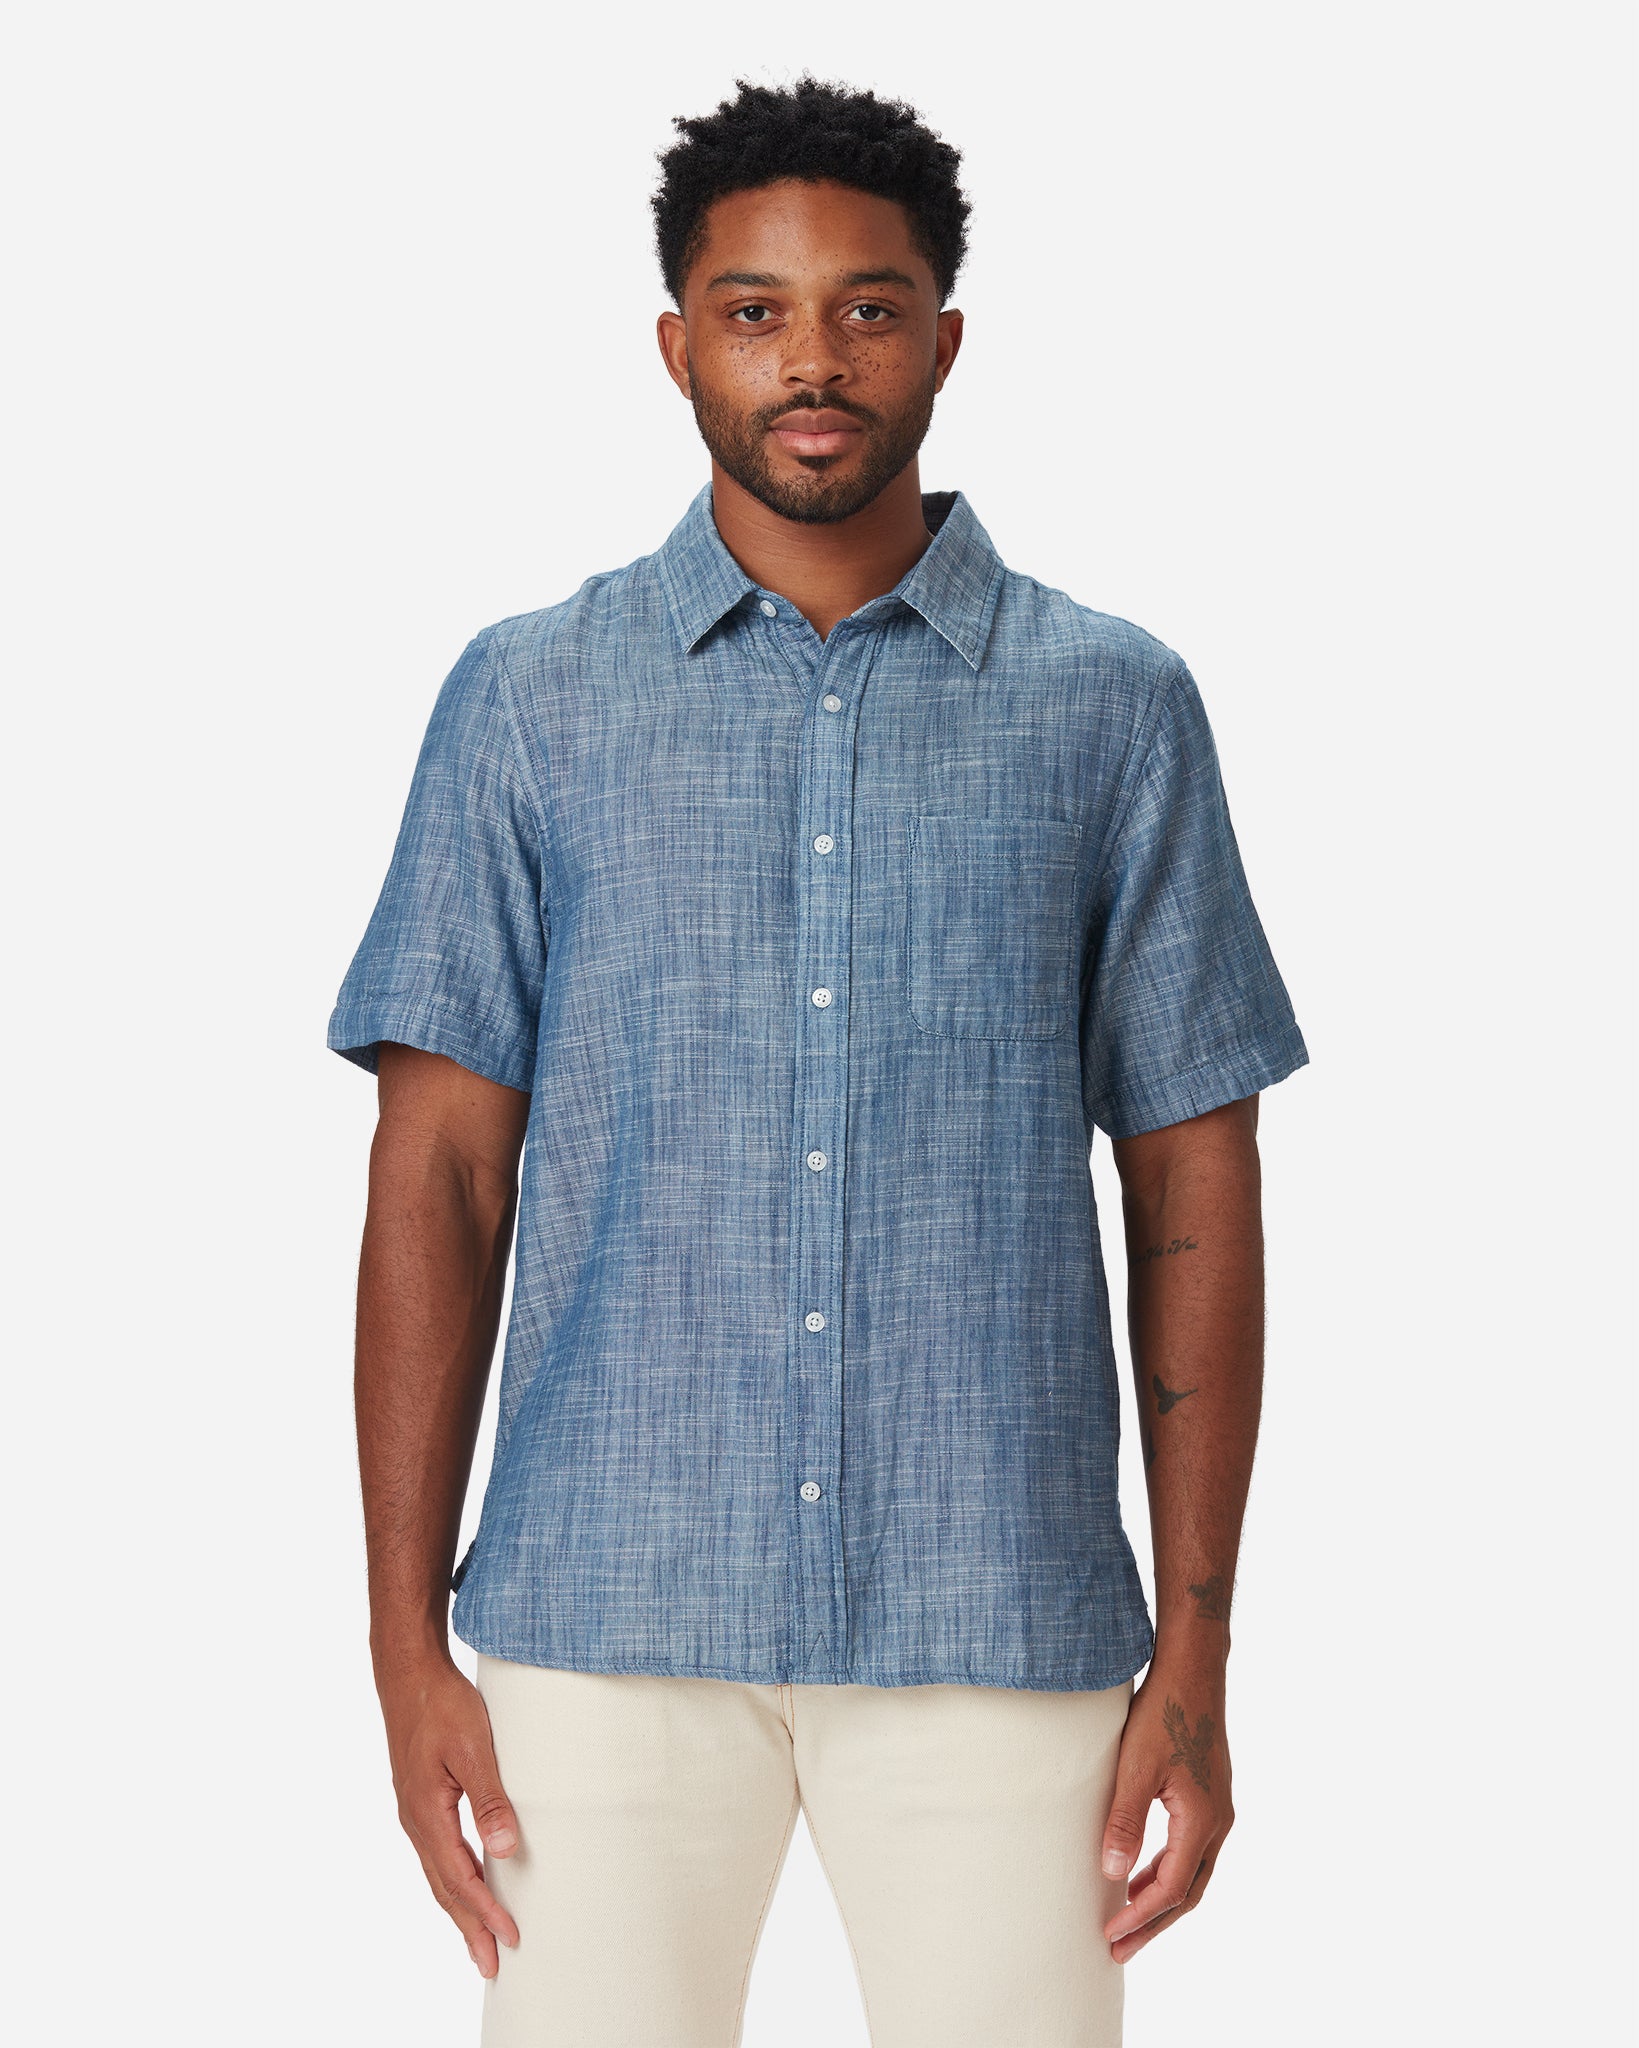 Model with a directly frontward gaze wearing Ace Rivington short-sleeved indigo slub soft textured-cotton shirt with linen hand feel, pearl buttons, left-breast pocket, collar, and off white interior and a pair of Ace Rivington ecru color denim jeans